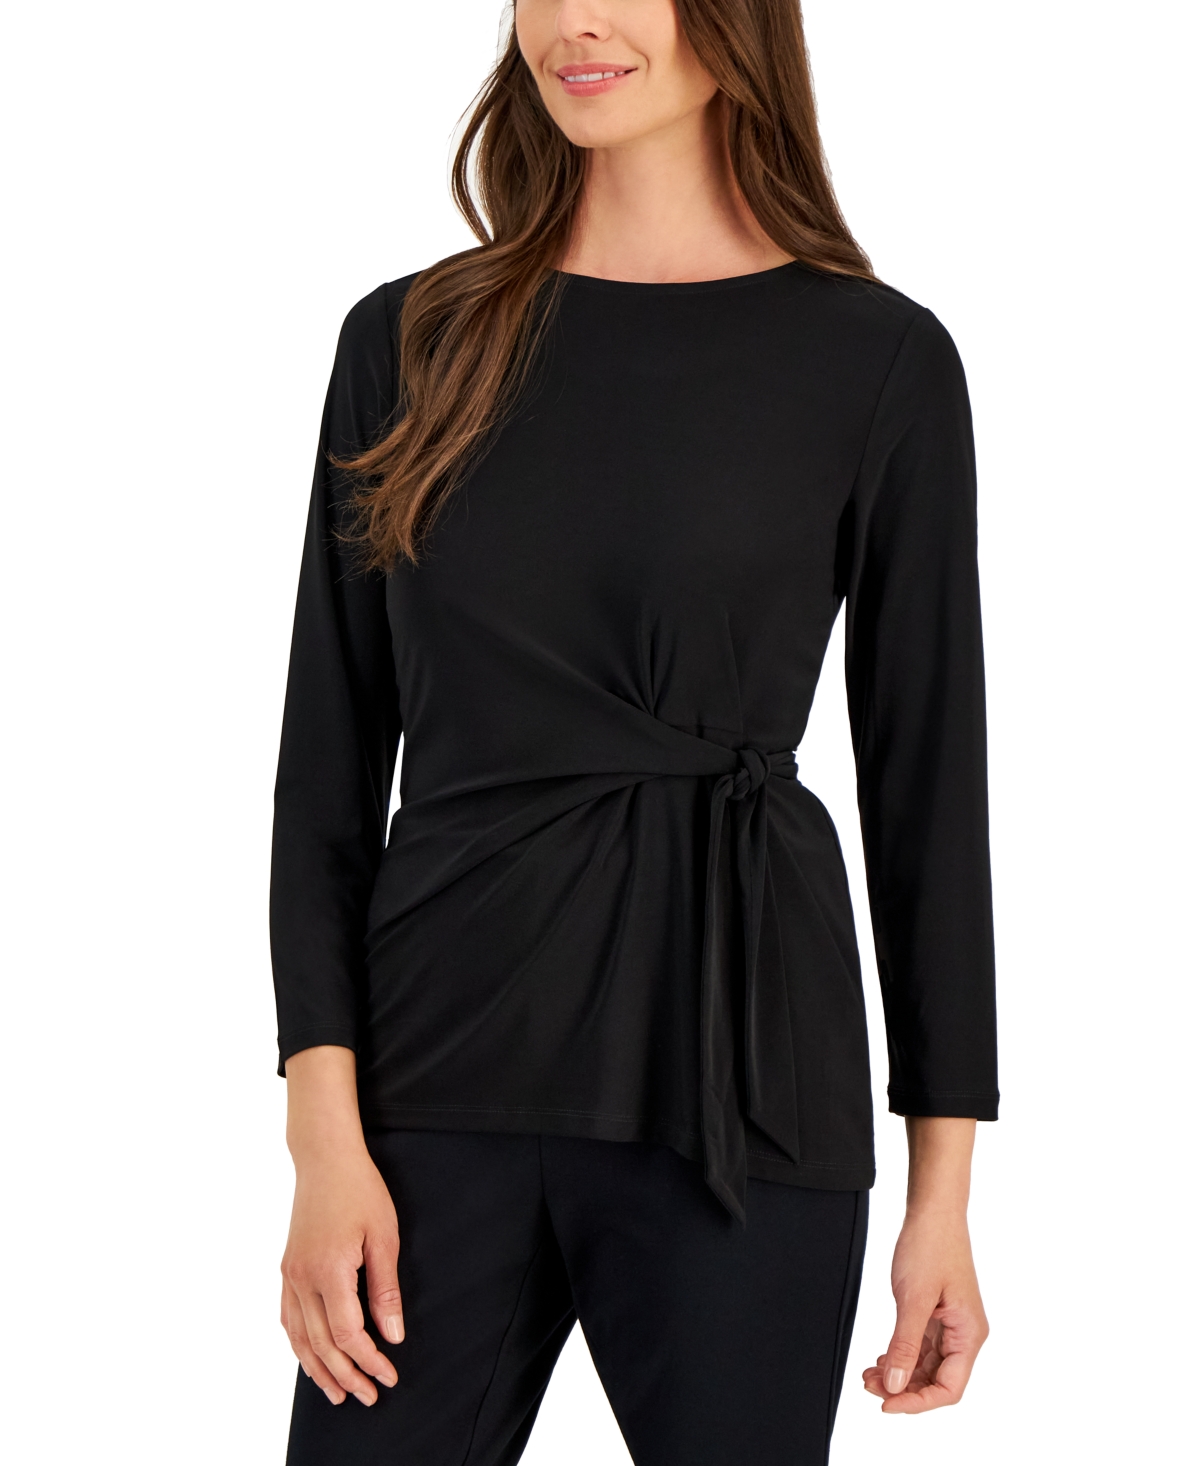 Women's Tie-Front Ruched Long-Sleeve Top - Black